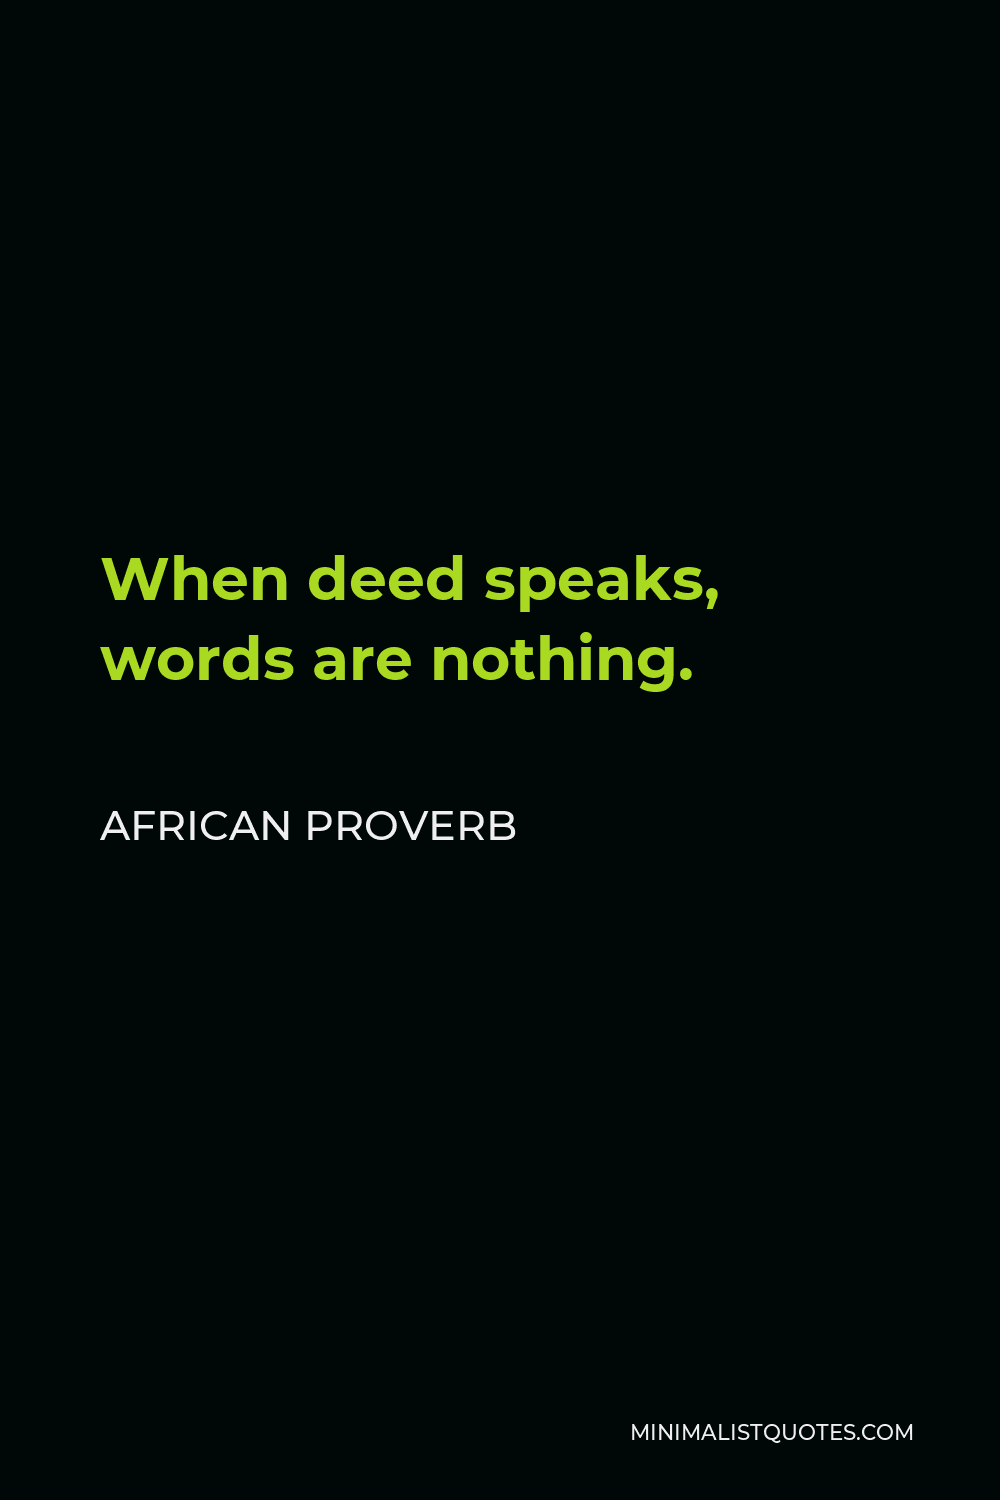 African Proverb Quote - When deed speaks, words are nothing.